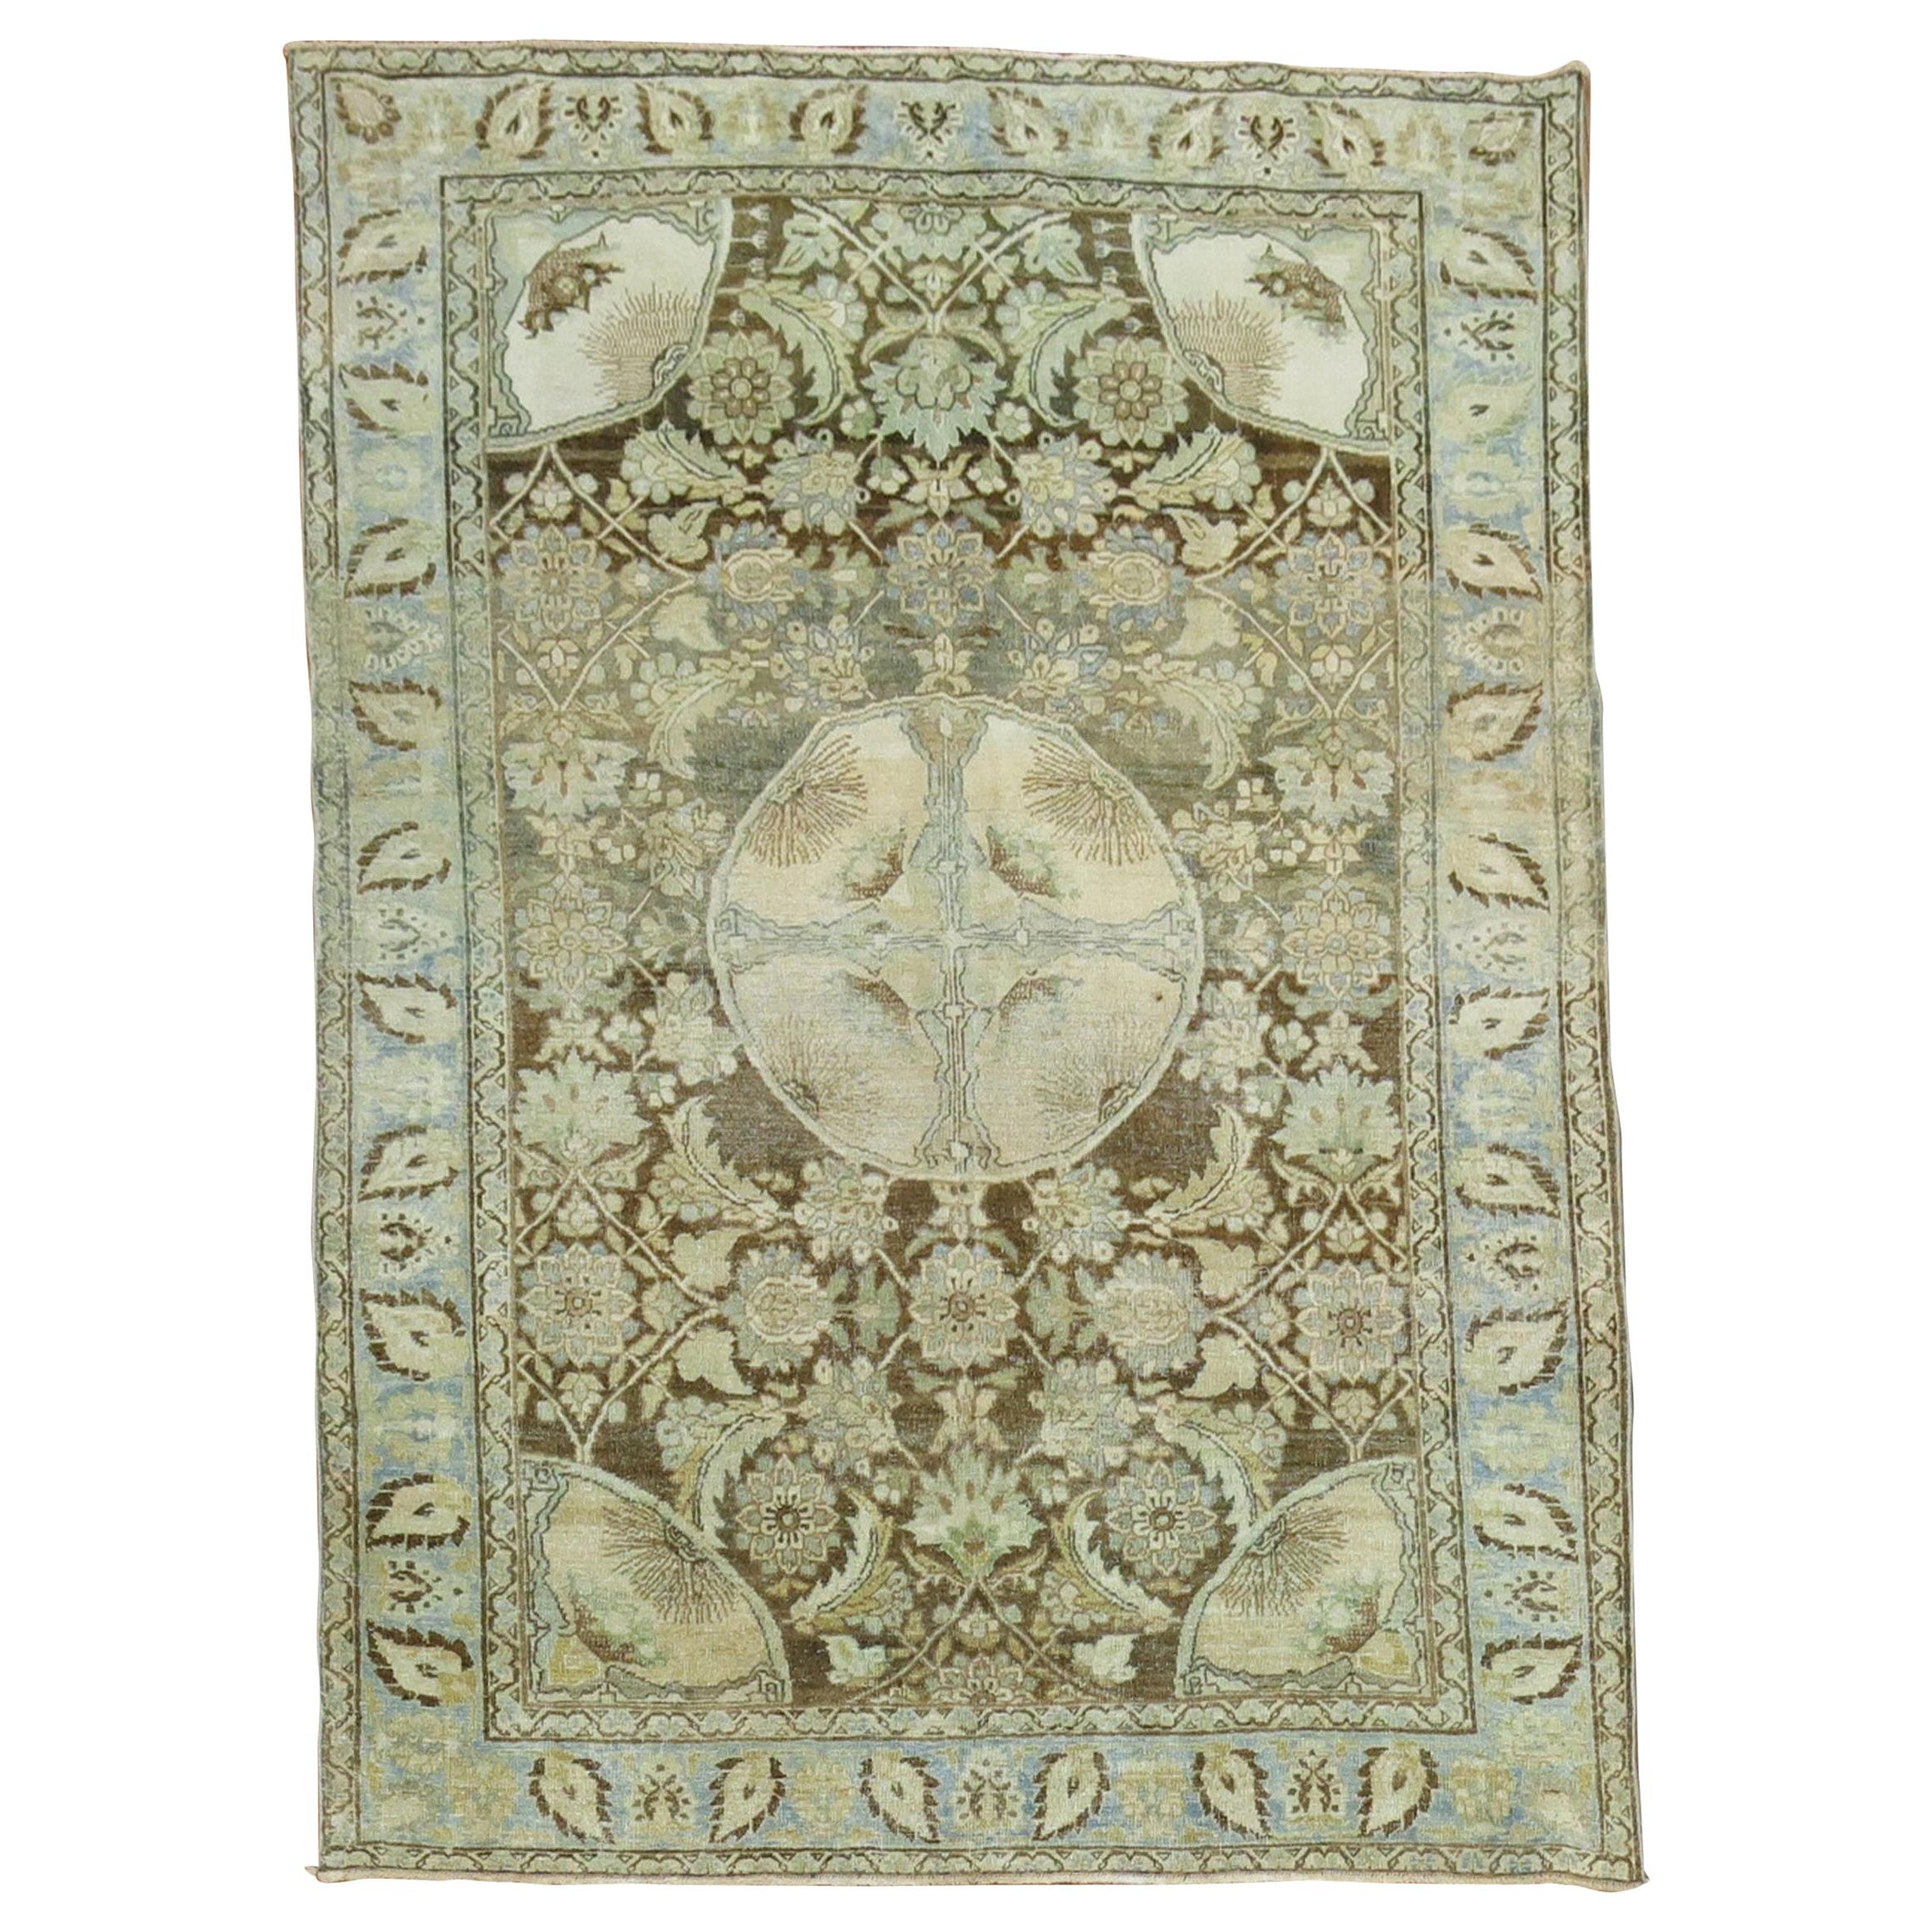 Eclectic Persian Blue Green Brown Tabriz Oriental Hand Knotted Rug